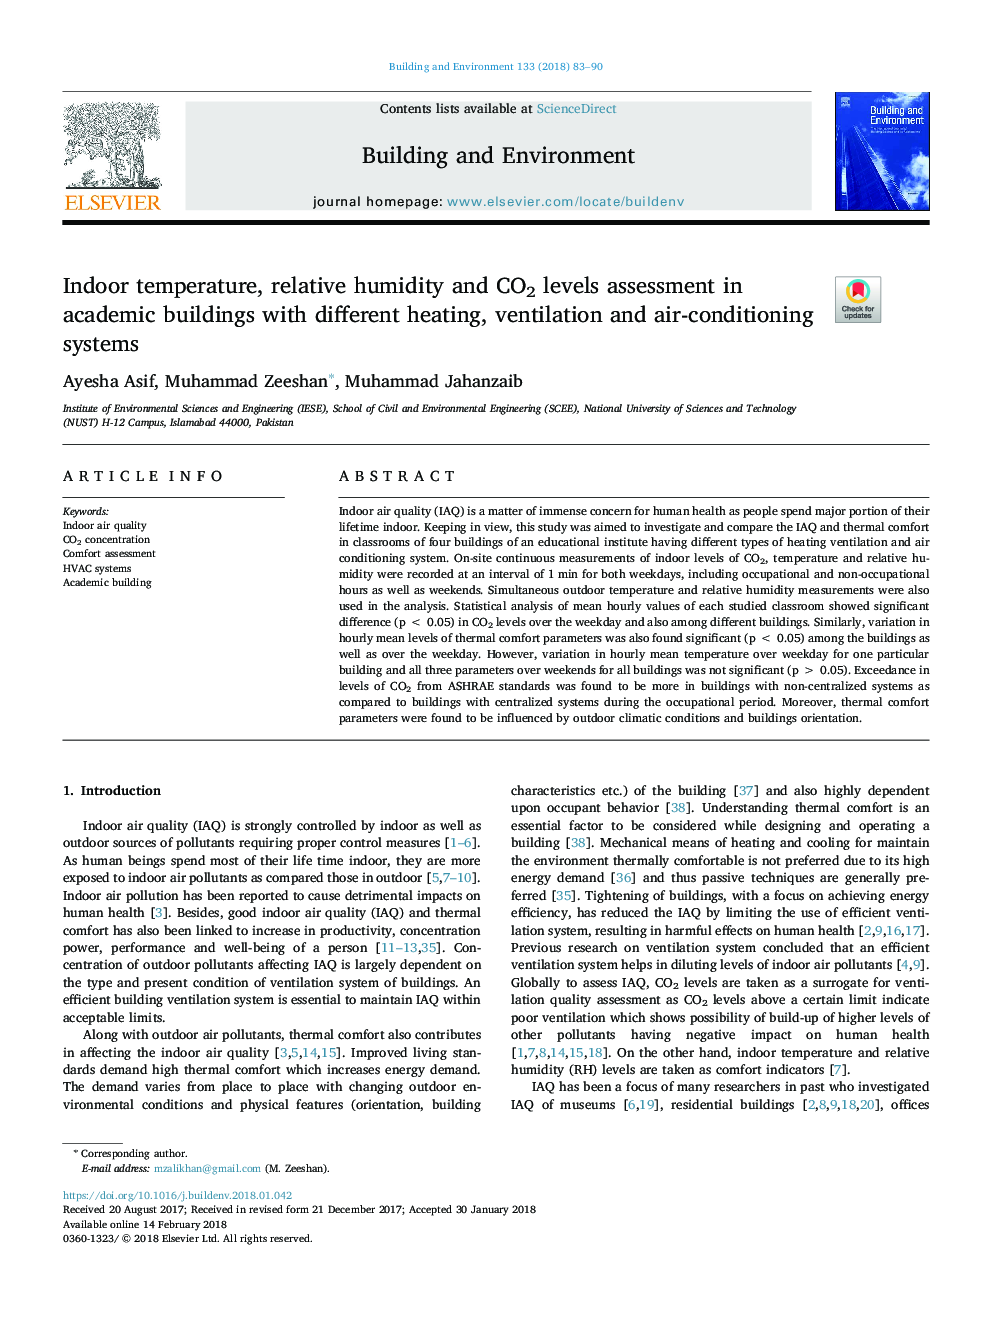 Indoor temperature, relative humidity and CO2 levels assessment in academic buildings with different heating, ventilation and air-conditioning systems